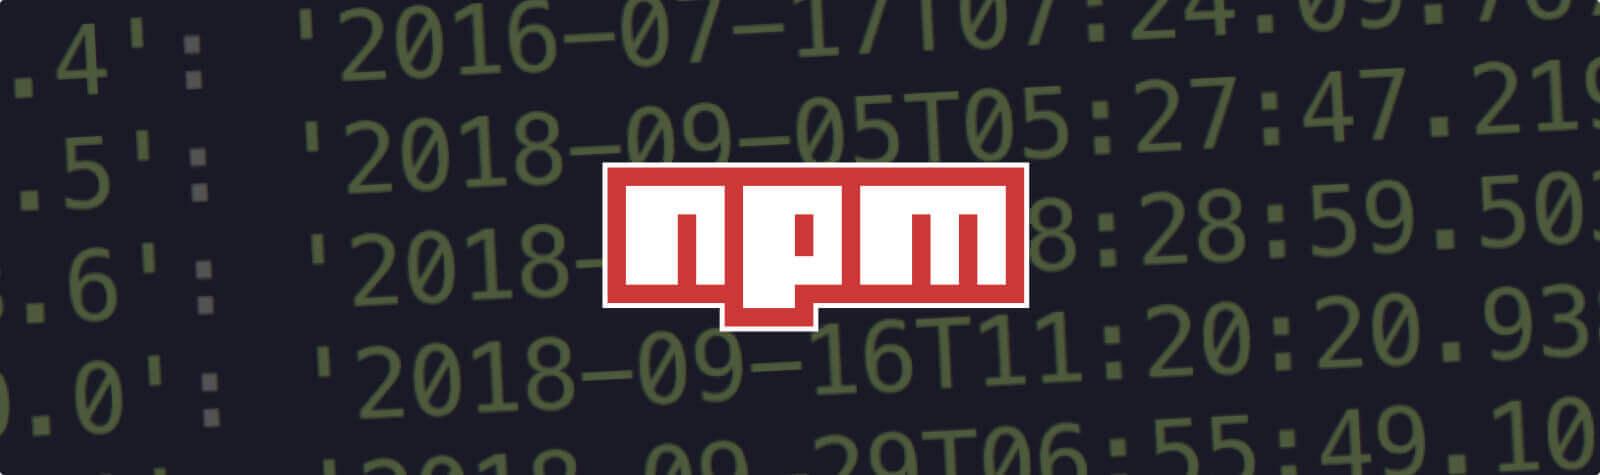 wordpress-sync/Malicious-code-found-in-npm-package-event-stream-downloaded-8-million-times-in-the-past-2.5-months-